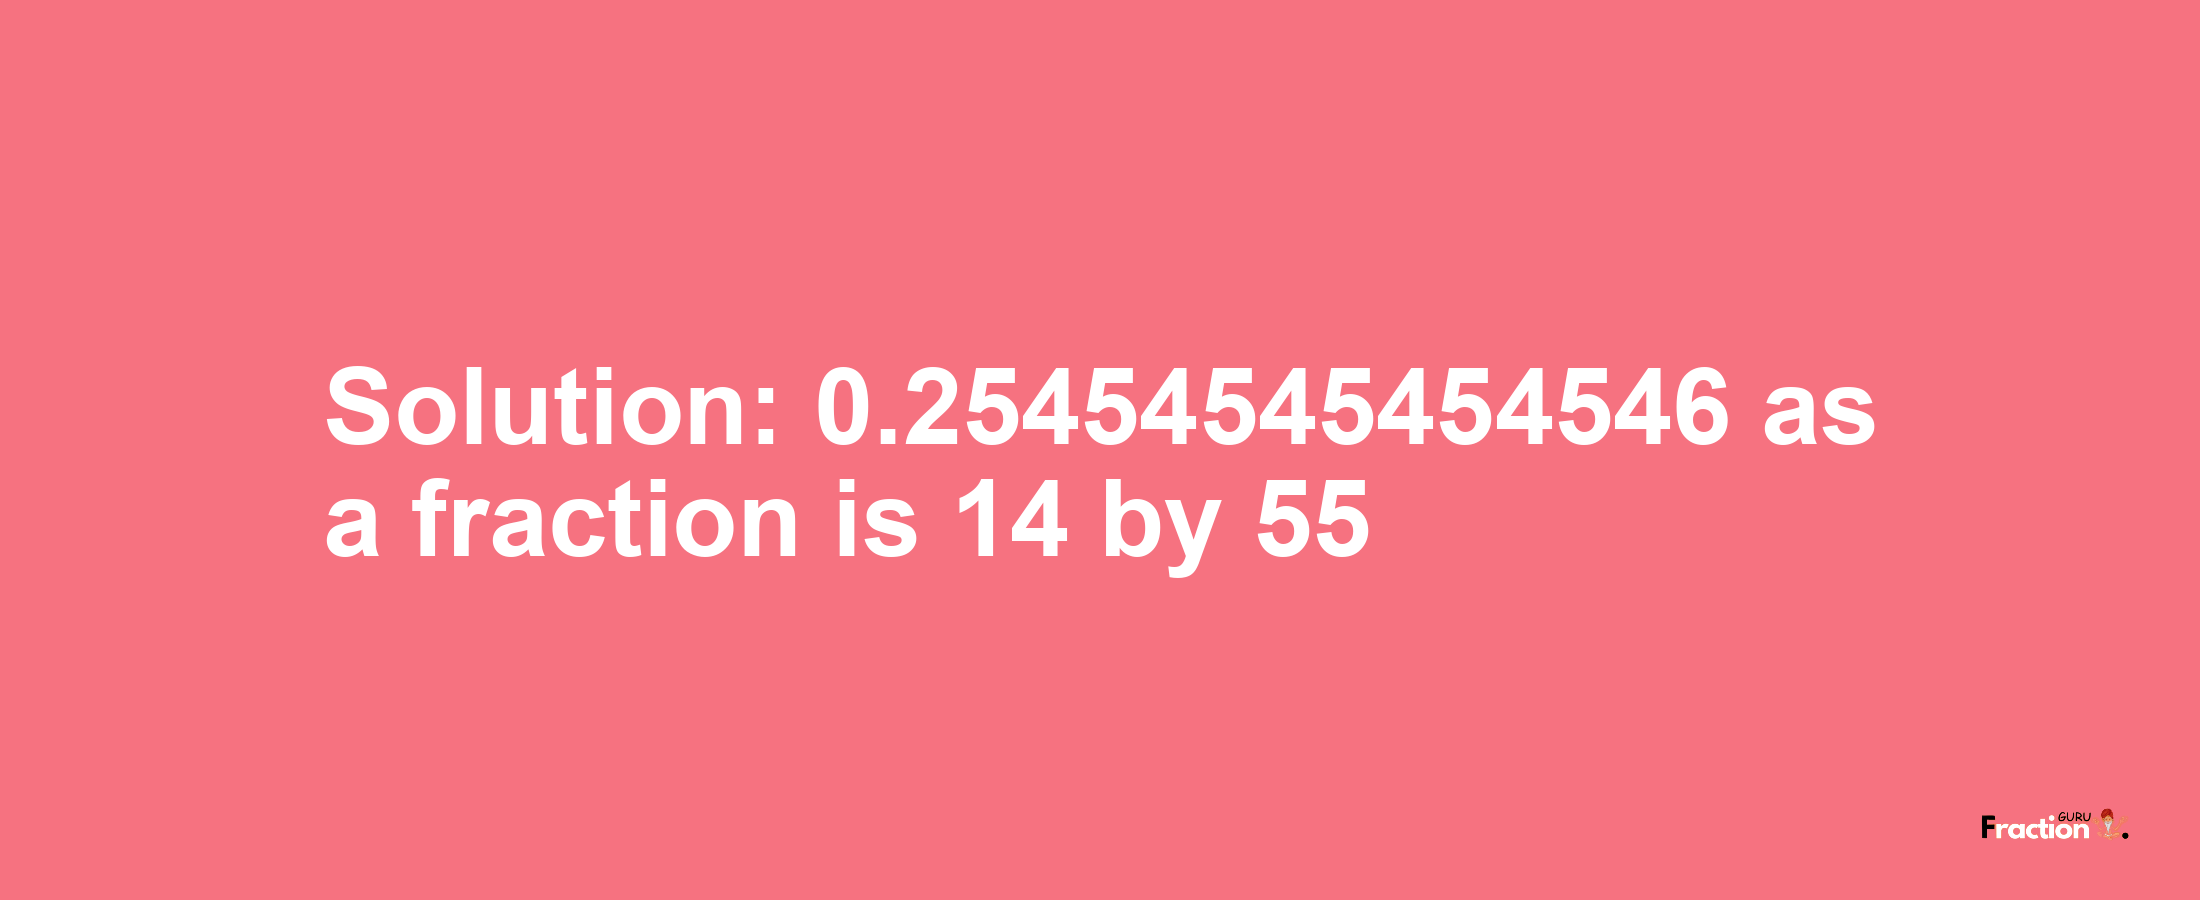 Solution:0.25454545454546 as a fraction is 14/55